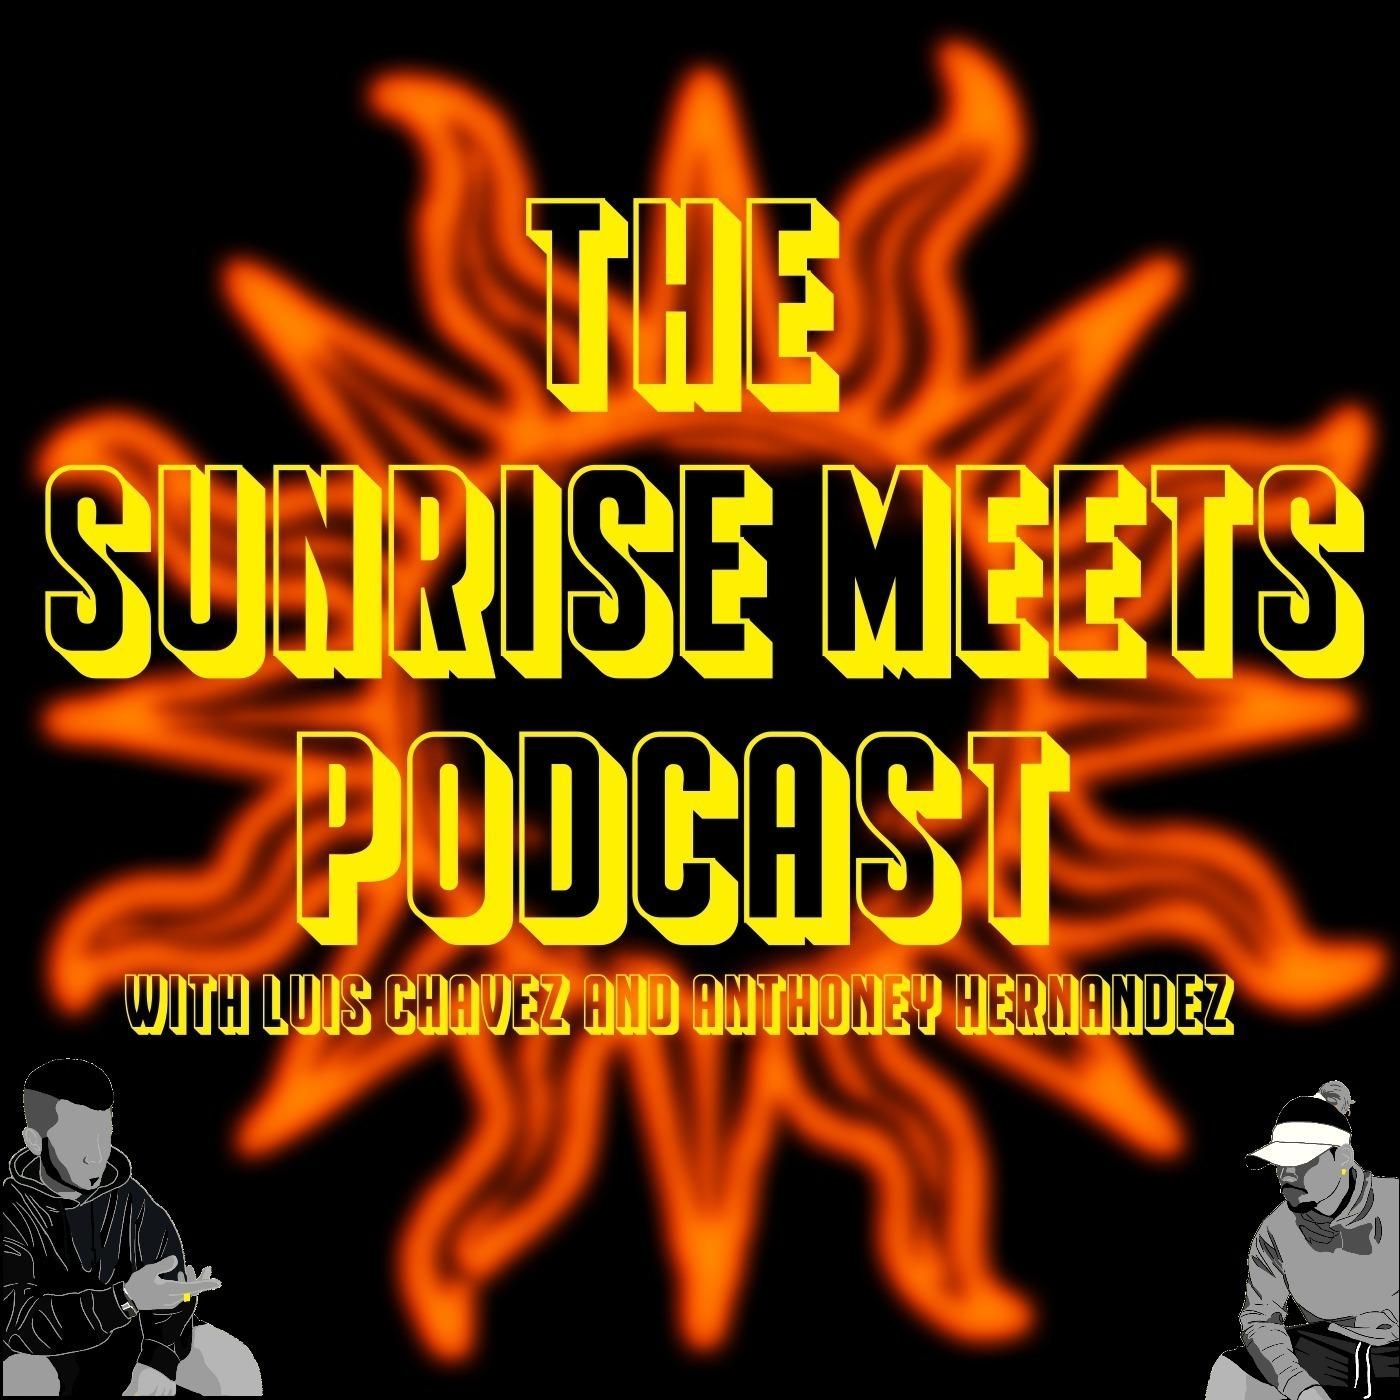 The Sunrise Meets Podcast 